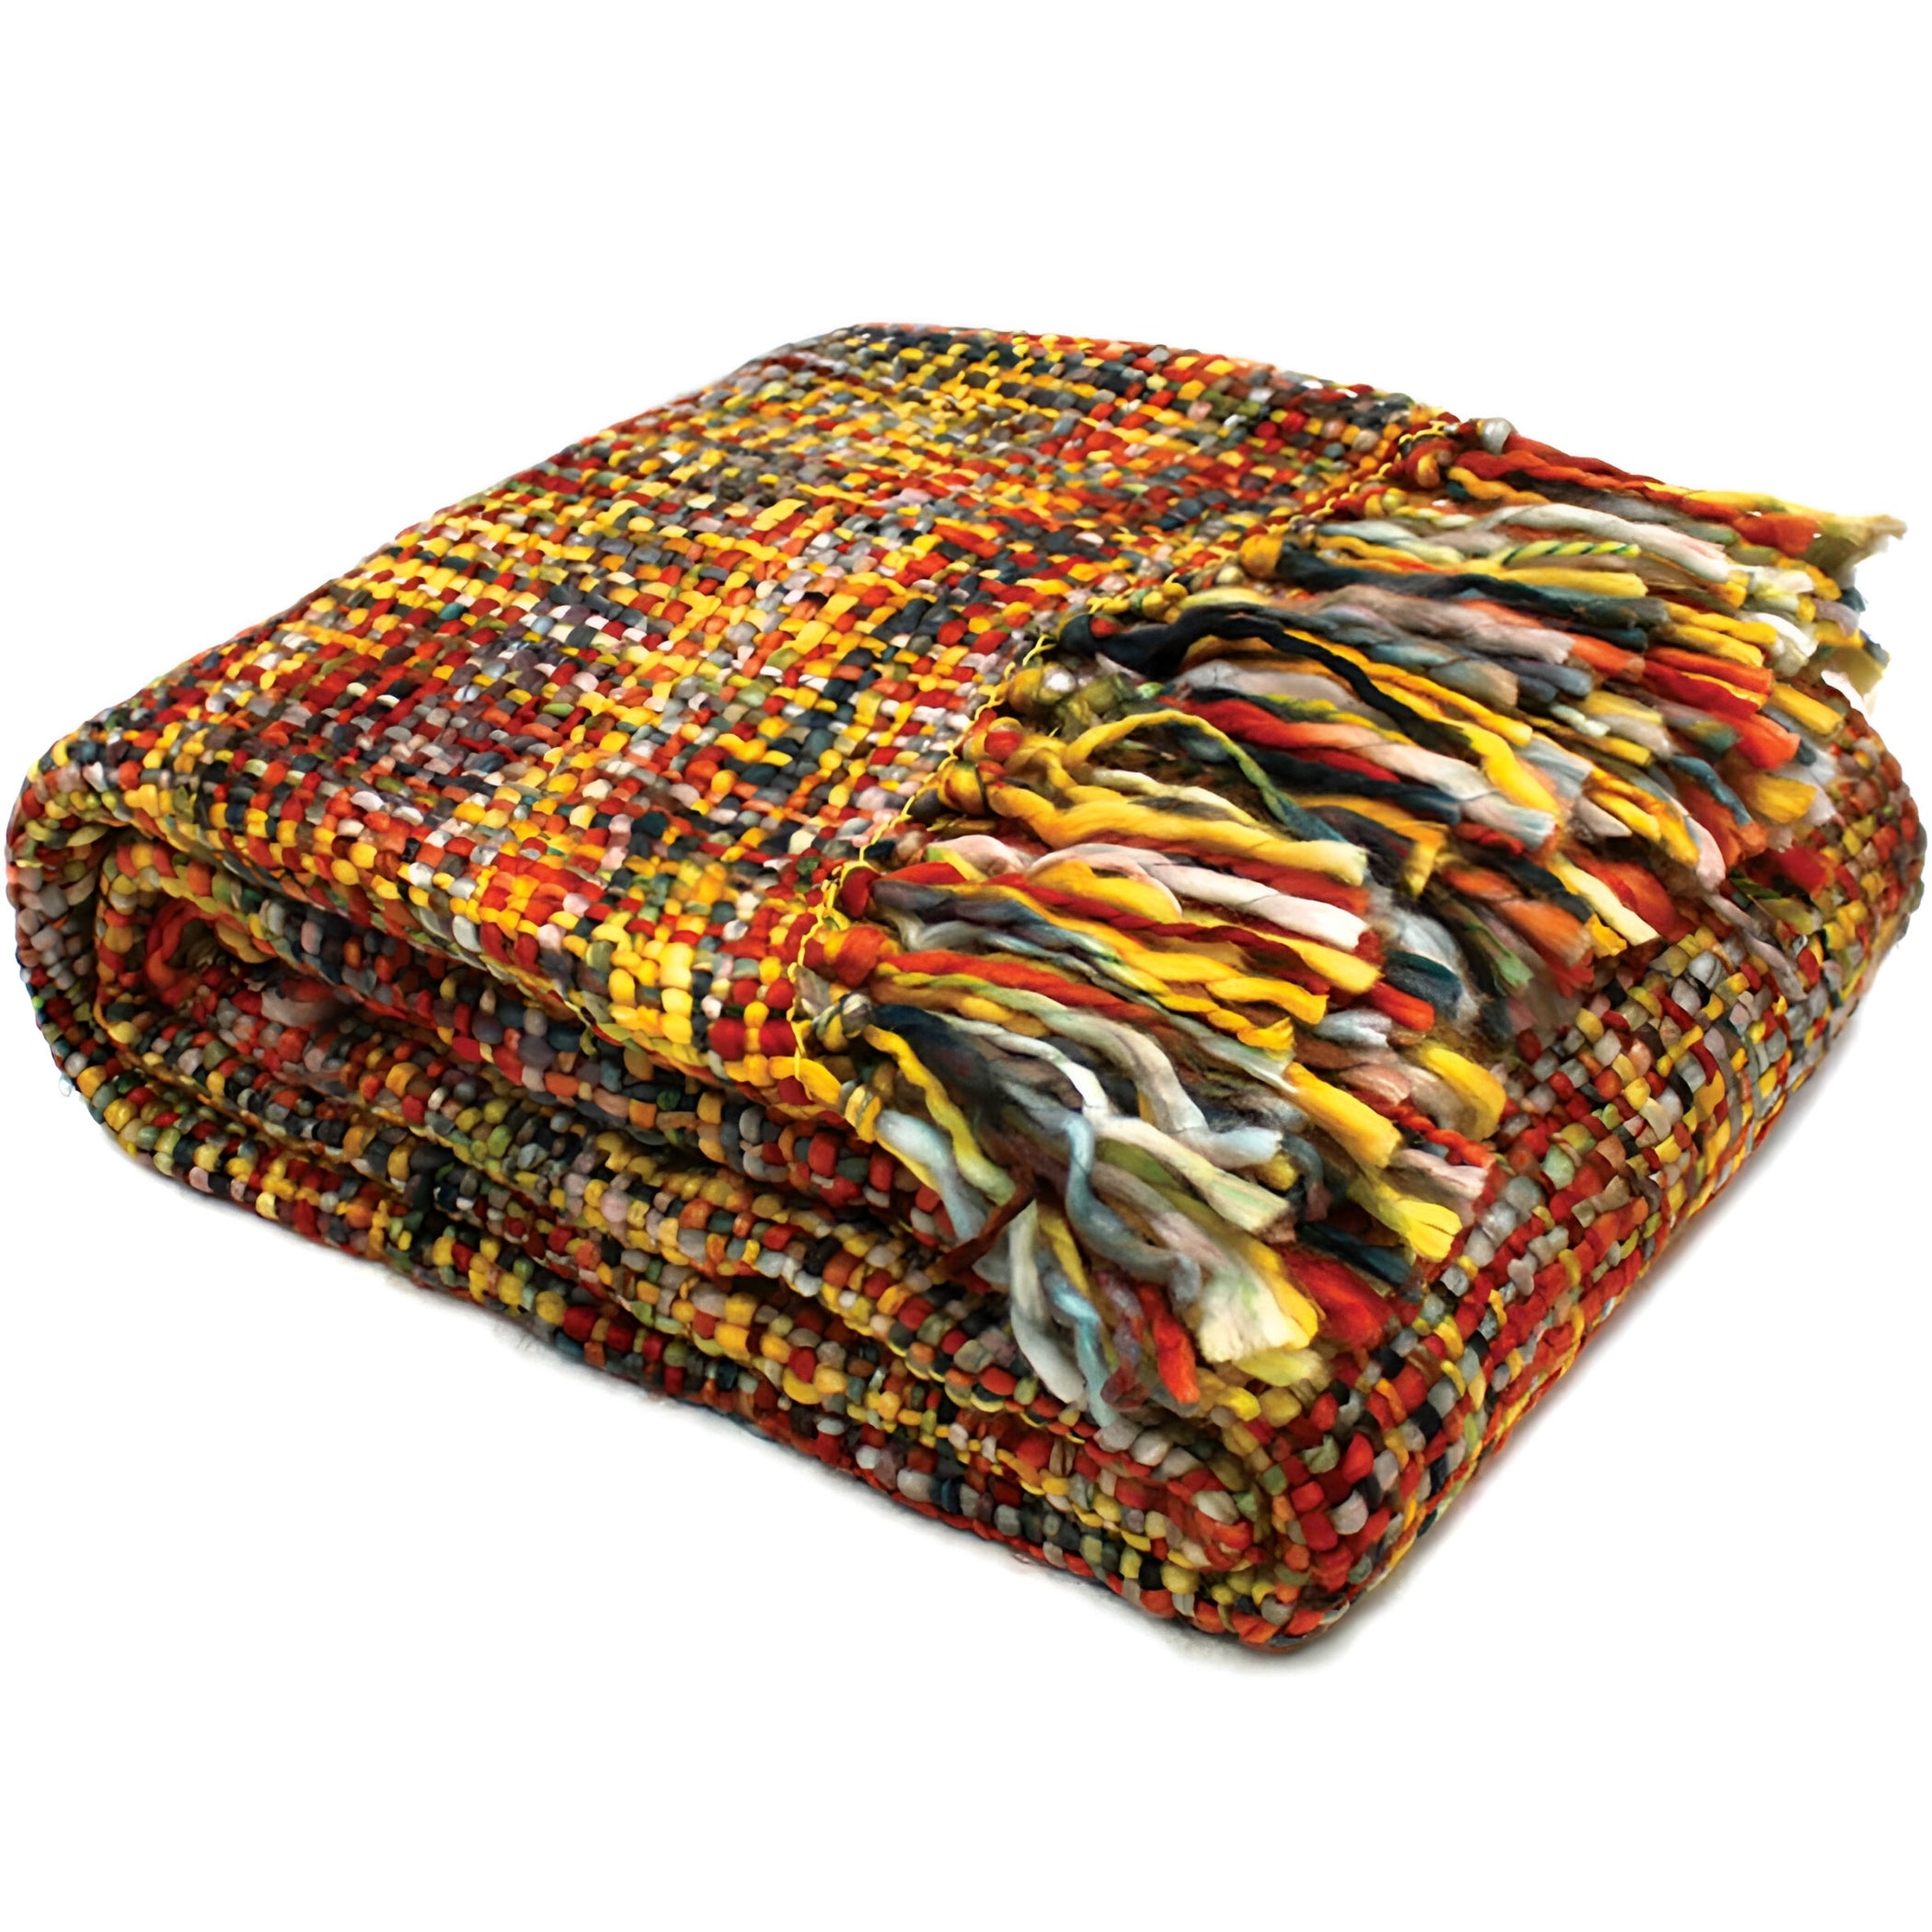 Quinn Knitted Weave Throw in Fire, folded to display the vivid mix of fire-inspired hues.